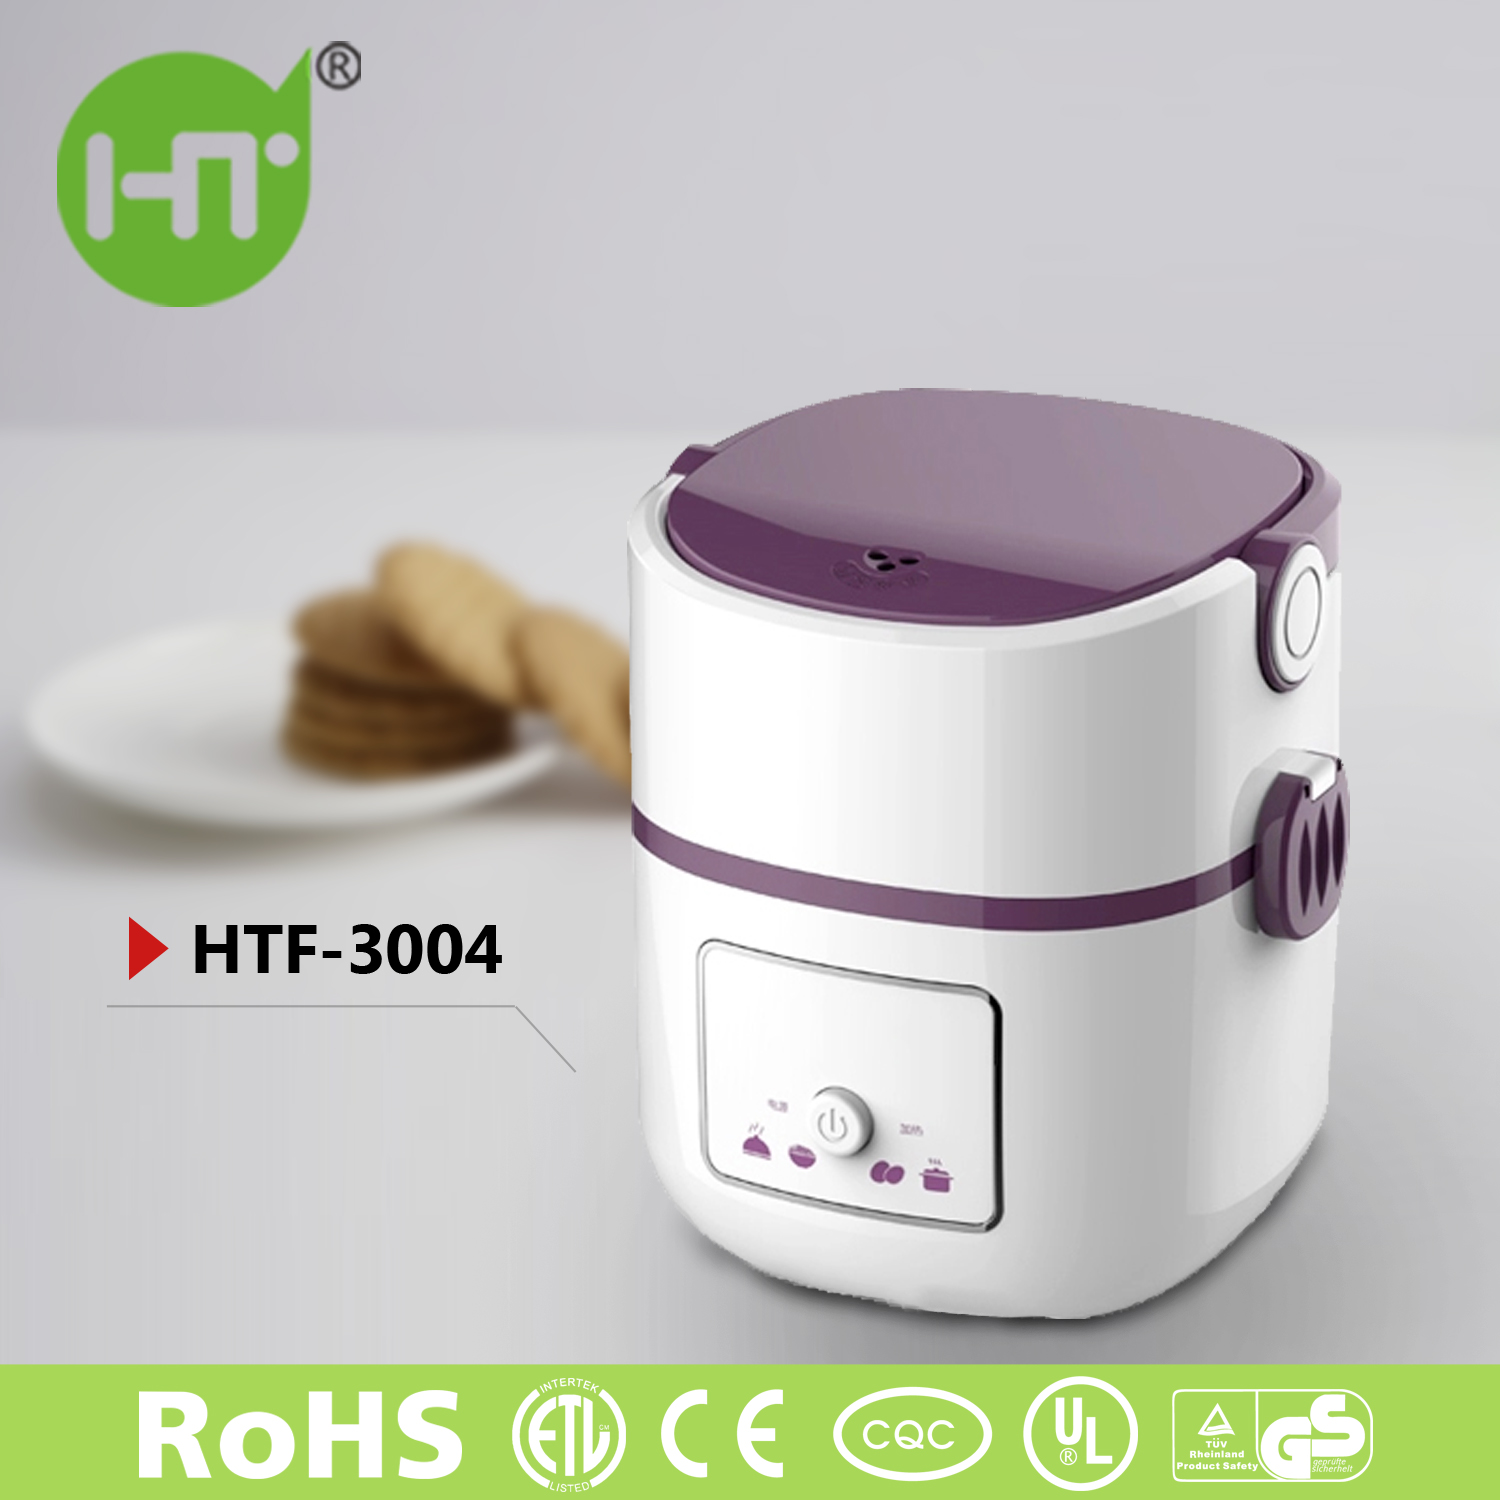 HTF-3004 2015 New Item DIY Keep Warm Thermal Electric Heated Lunch Box Mini Rice Cooker